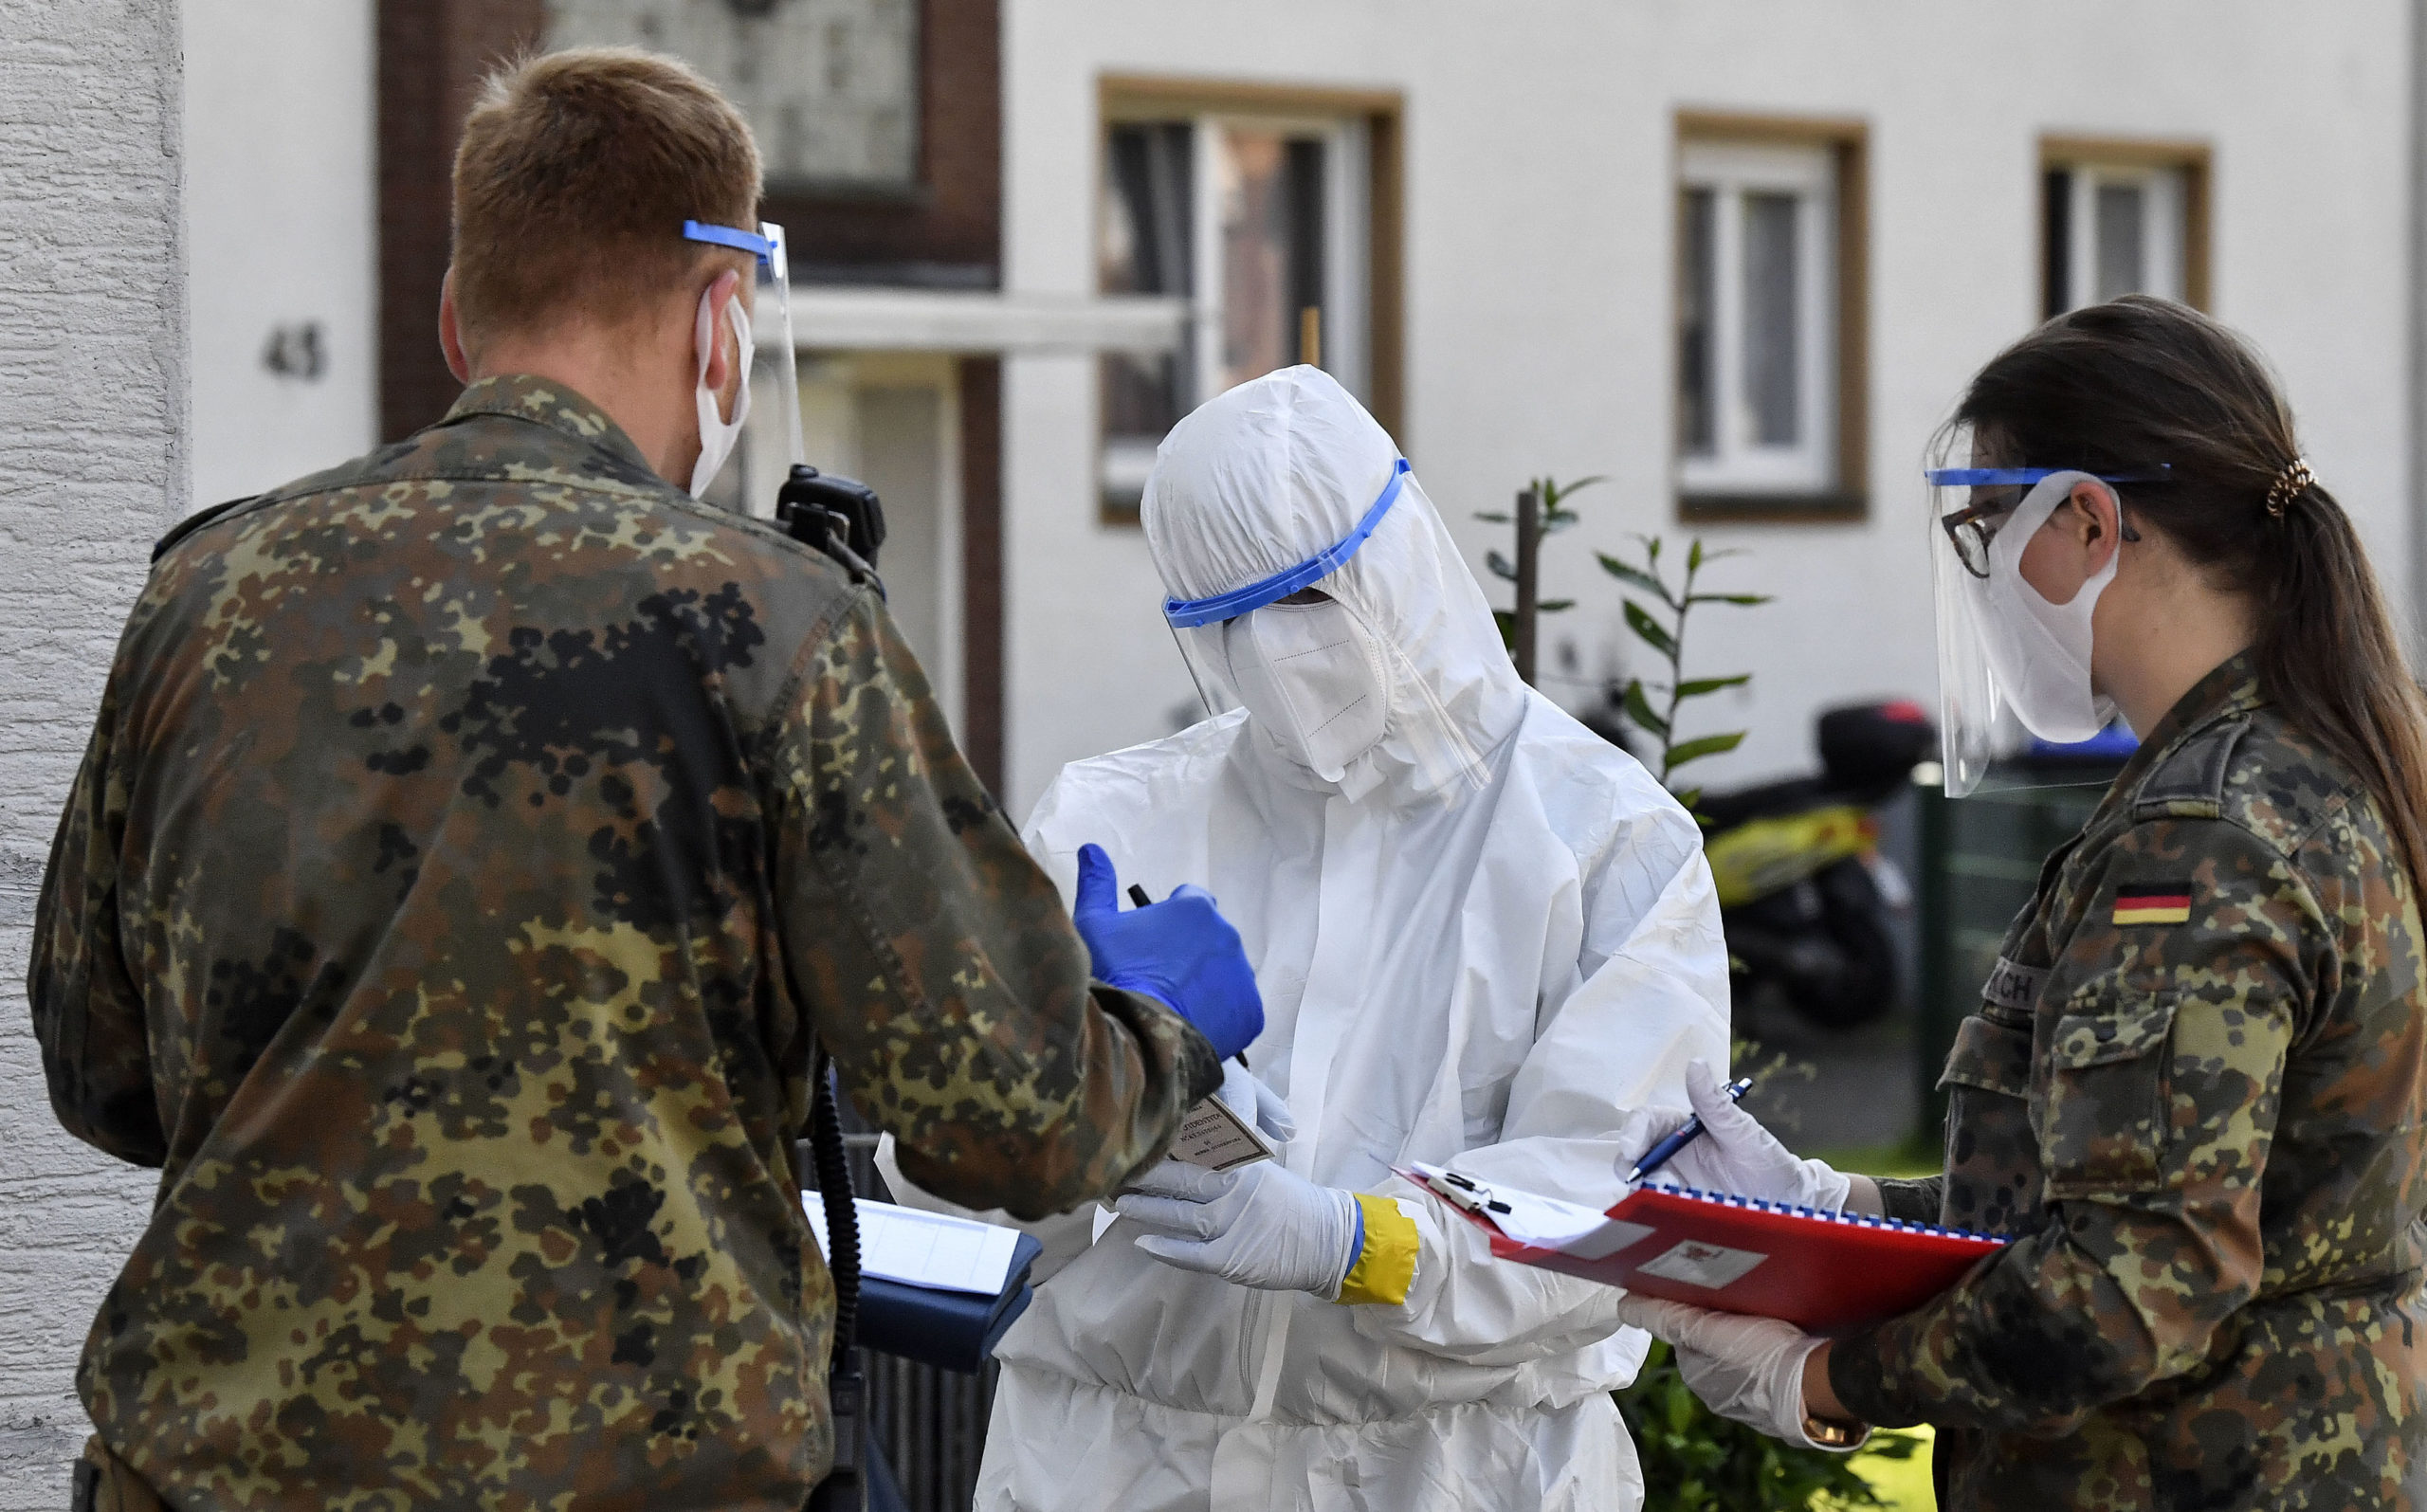 Medical staff and army members take Covid-19 tests of Tonnies employees and their families who are quarantined behind fences in Verl, Germany.